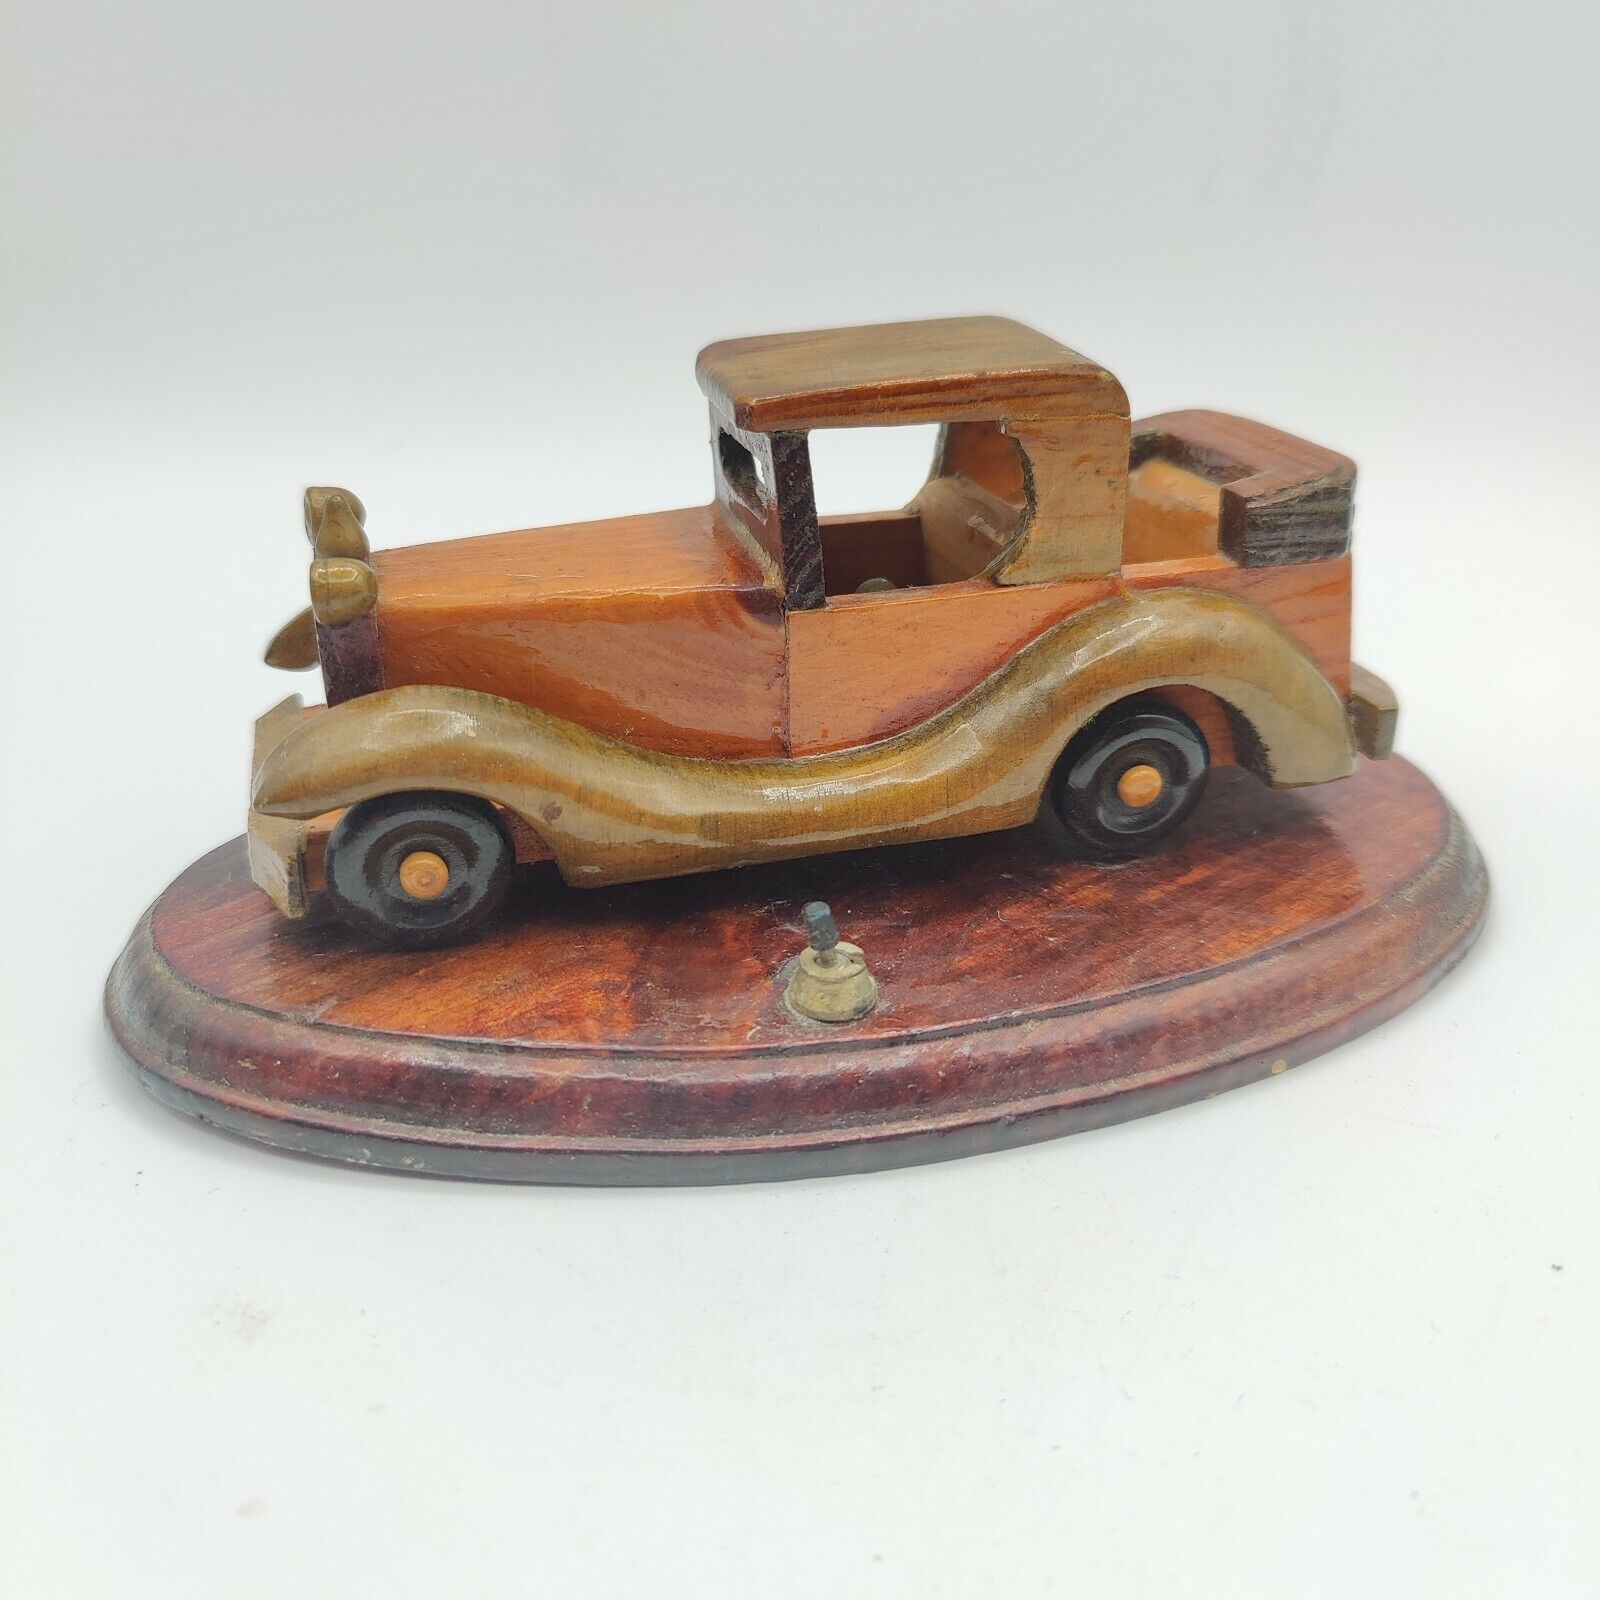 Vtg Wood Carved Model Car Roadster Rumble Seat People’s Republic of China 1970s